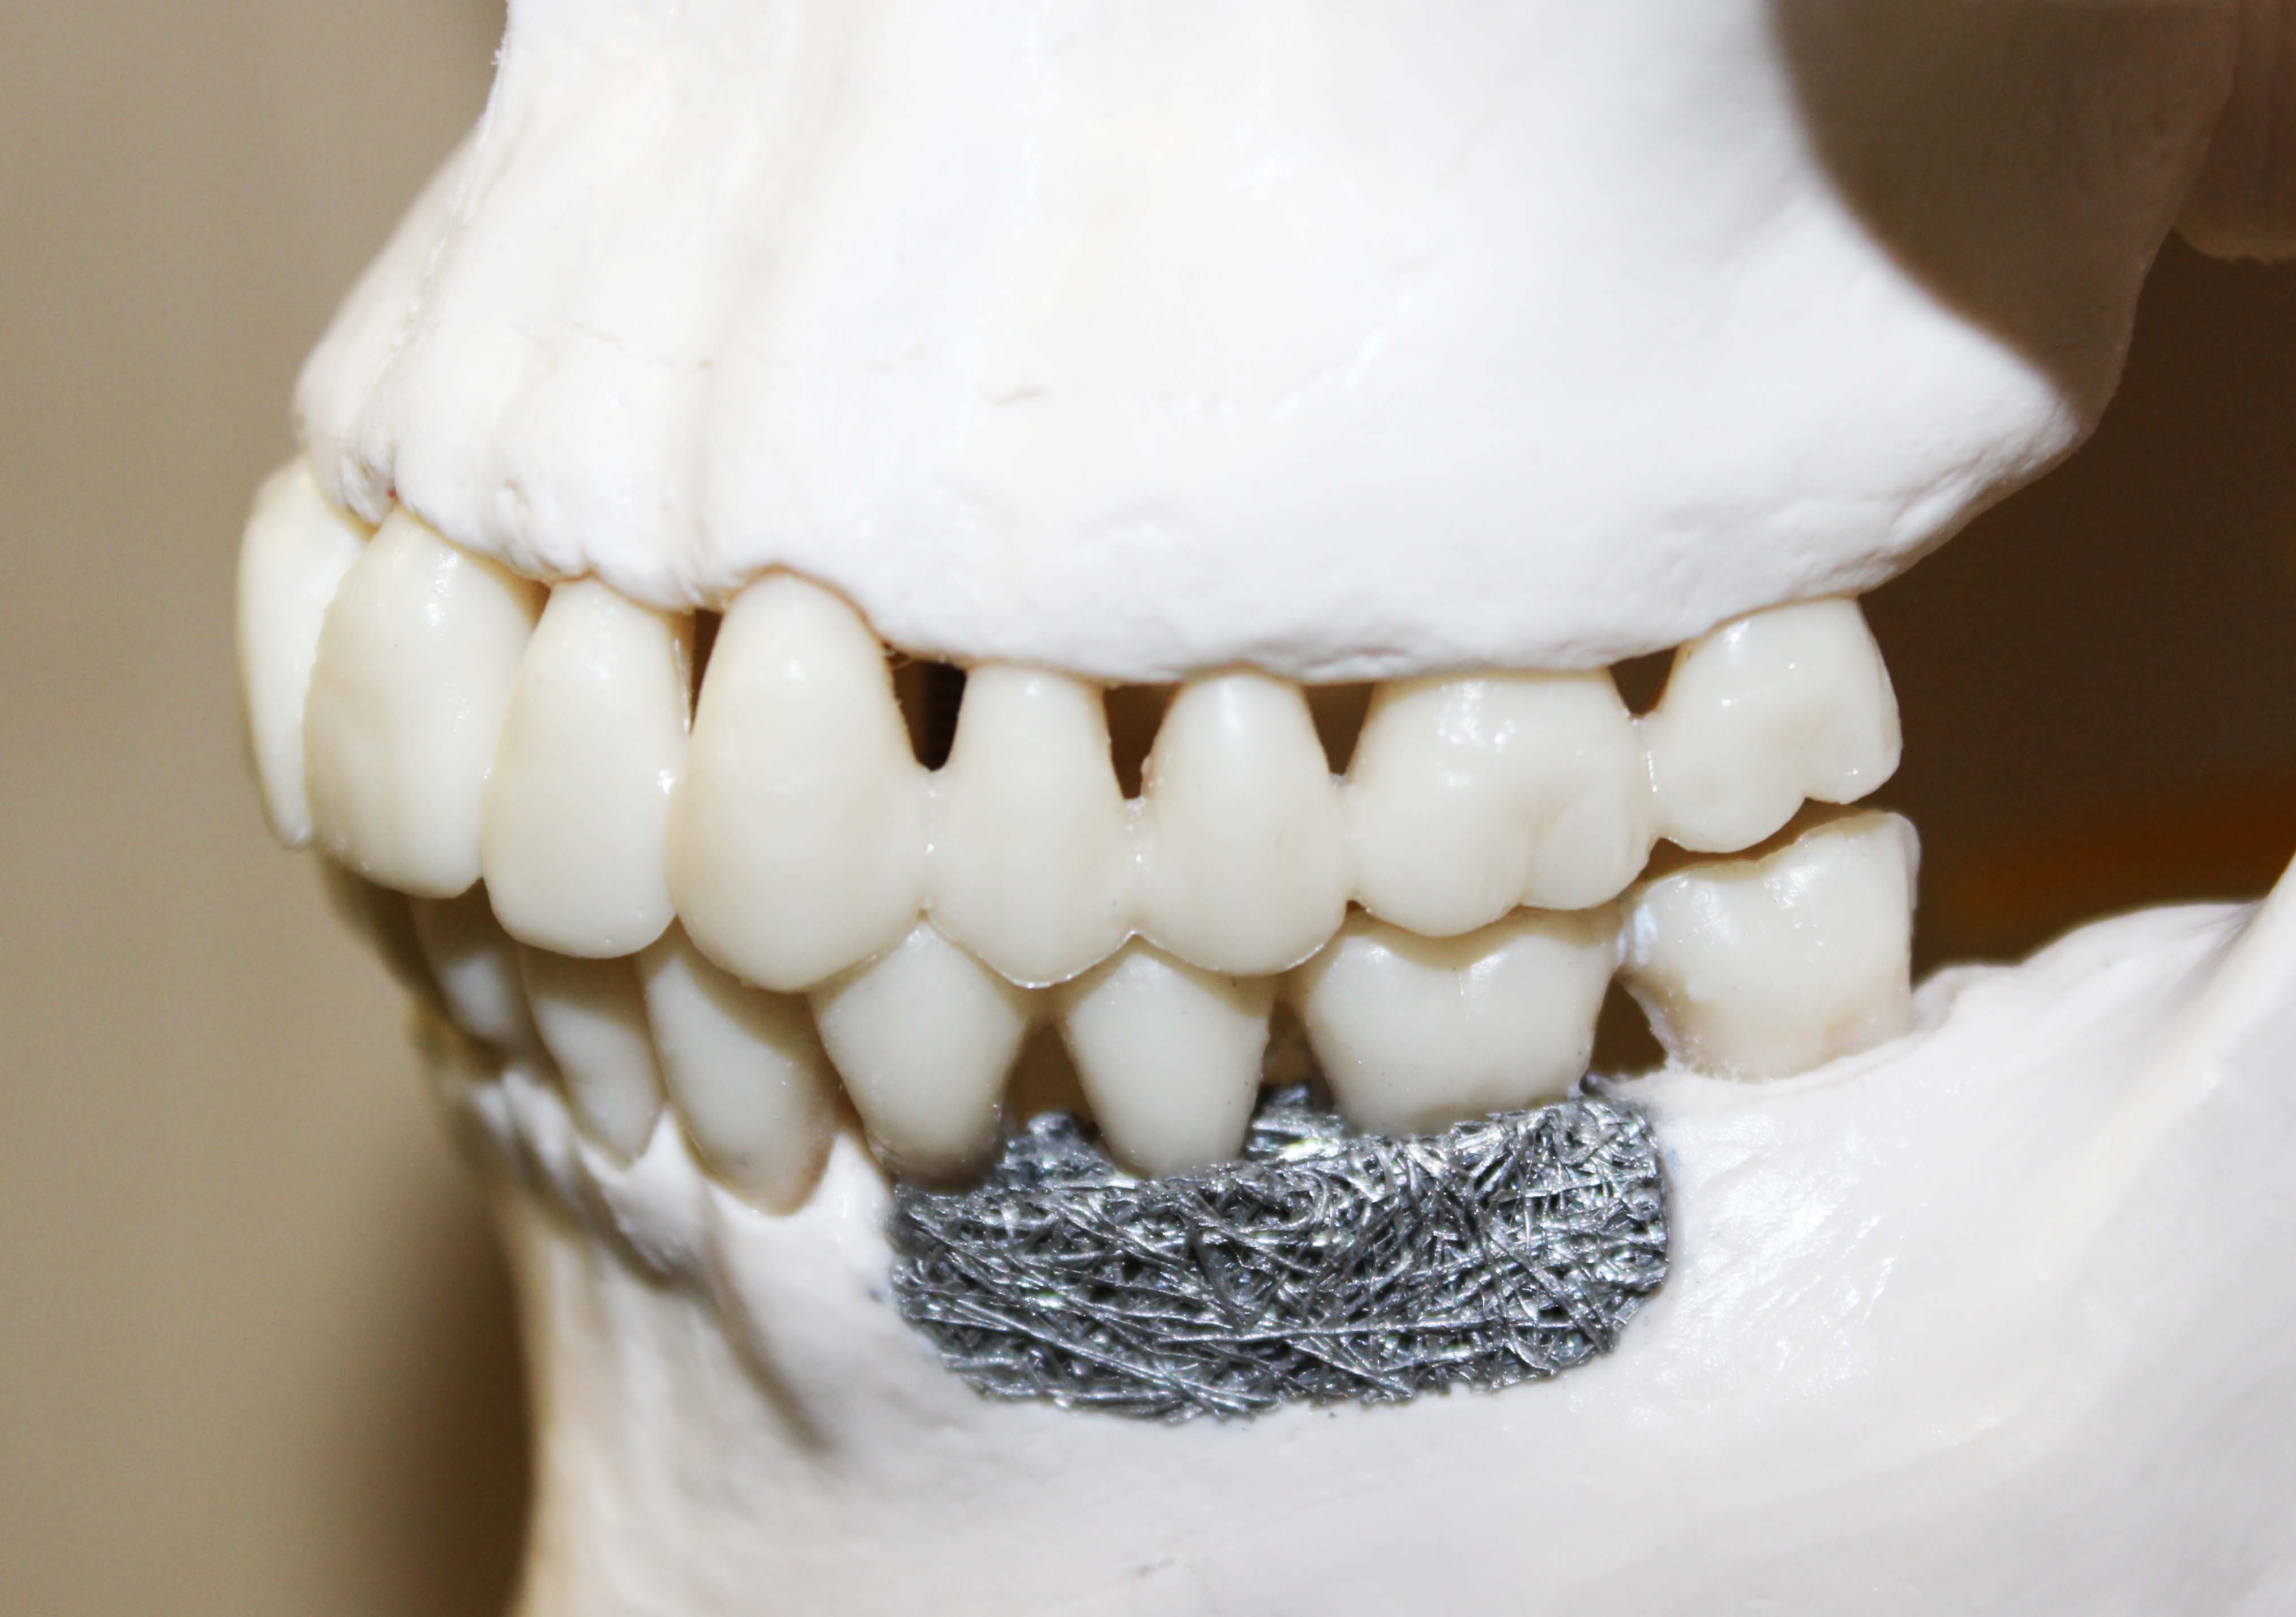 Example of a Magnesium Implant in Oral Surgery (Model)